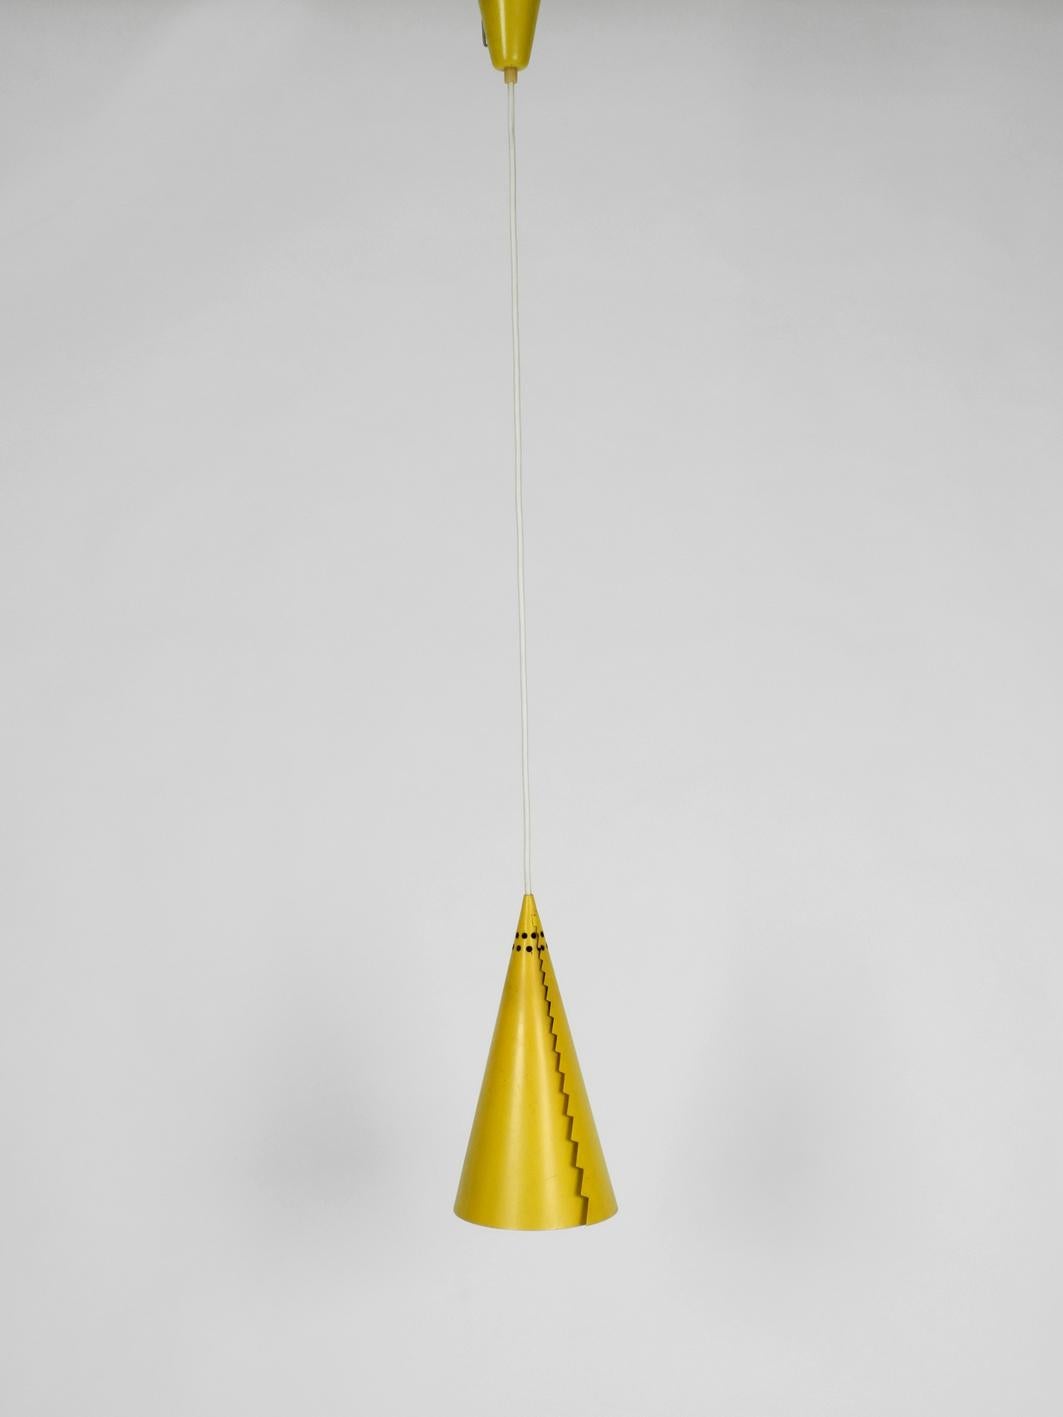 Mid-20th Century Rare Mid-Century Modern Cone Shaped Pendant Lamp Made of Sheet Steel in Yellow For Sale